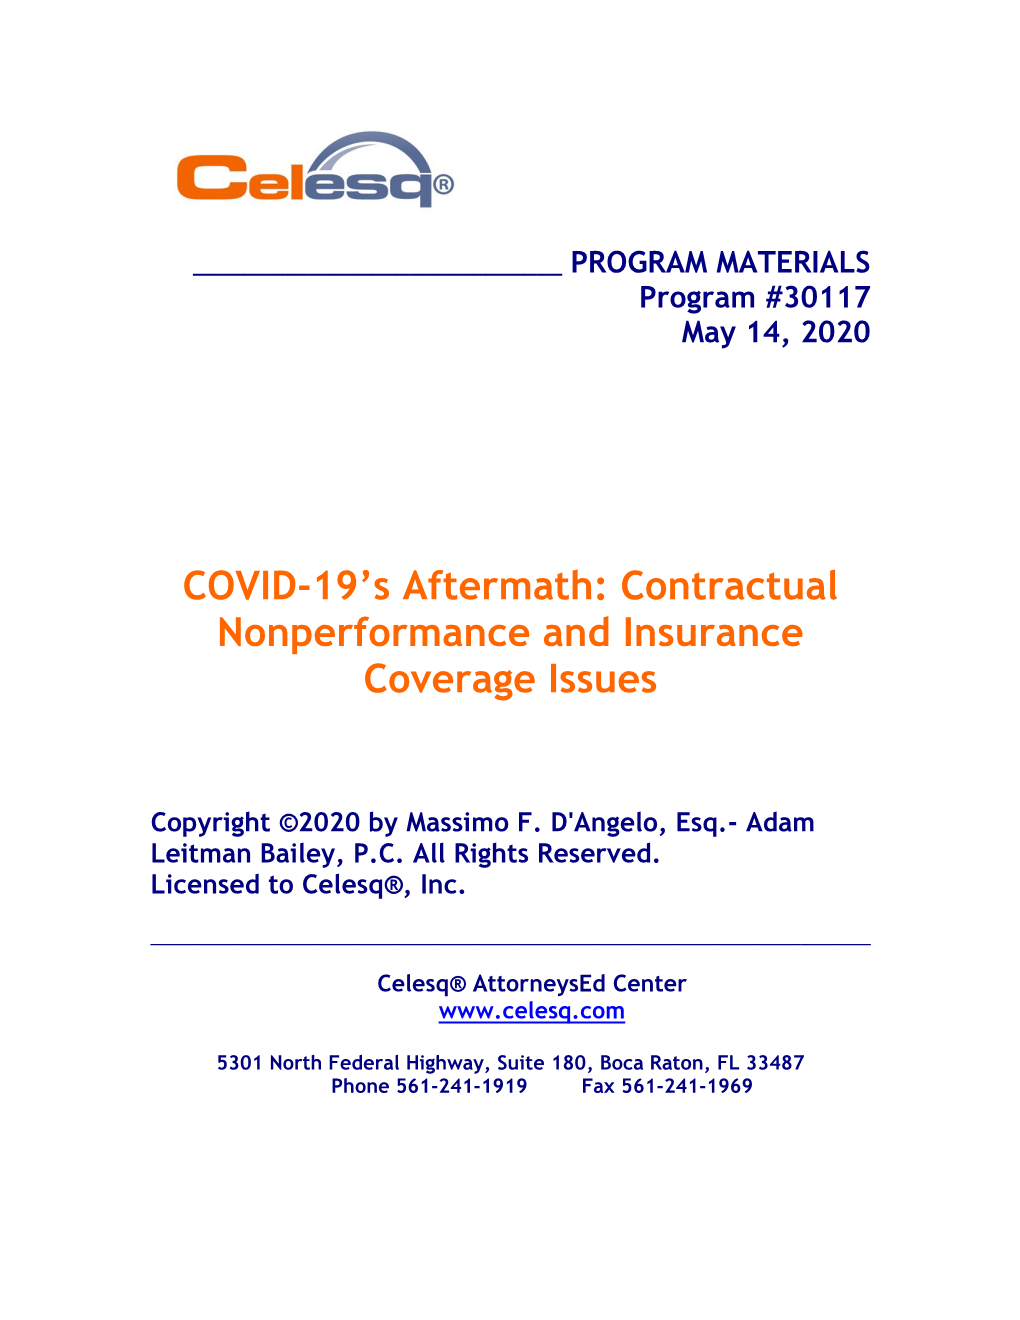 COVID-19'S Aftermath: Contractual Nonperformance and Insurance